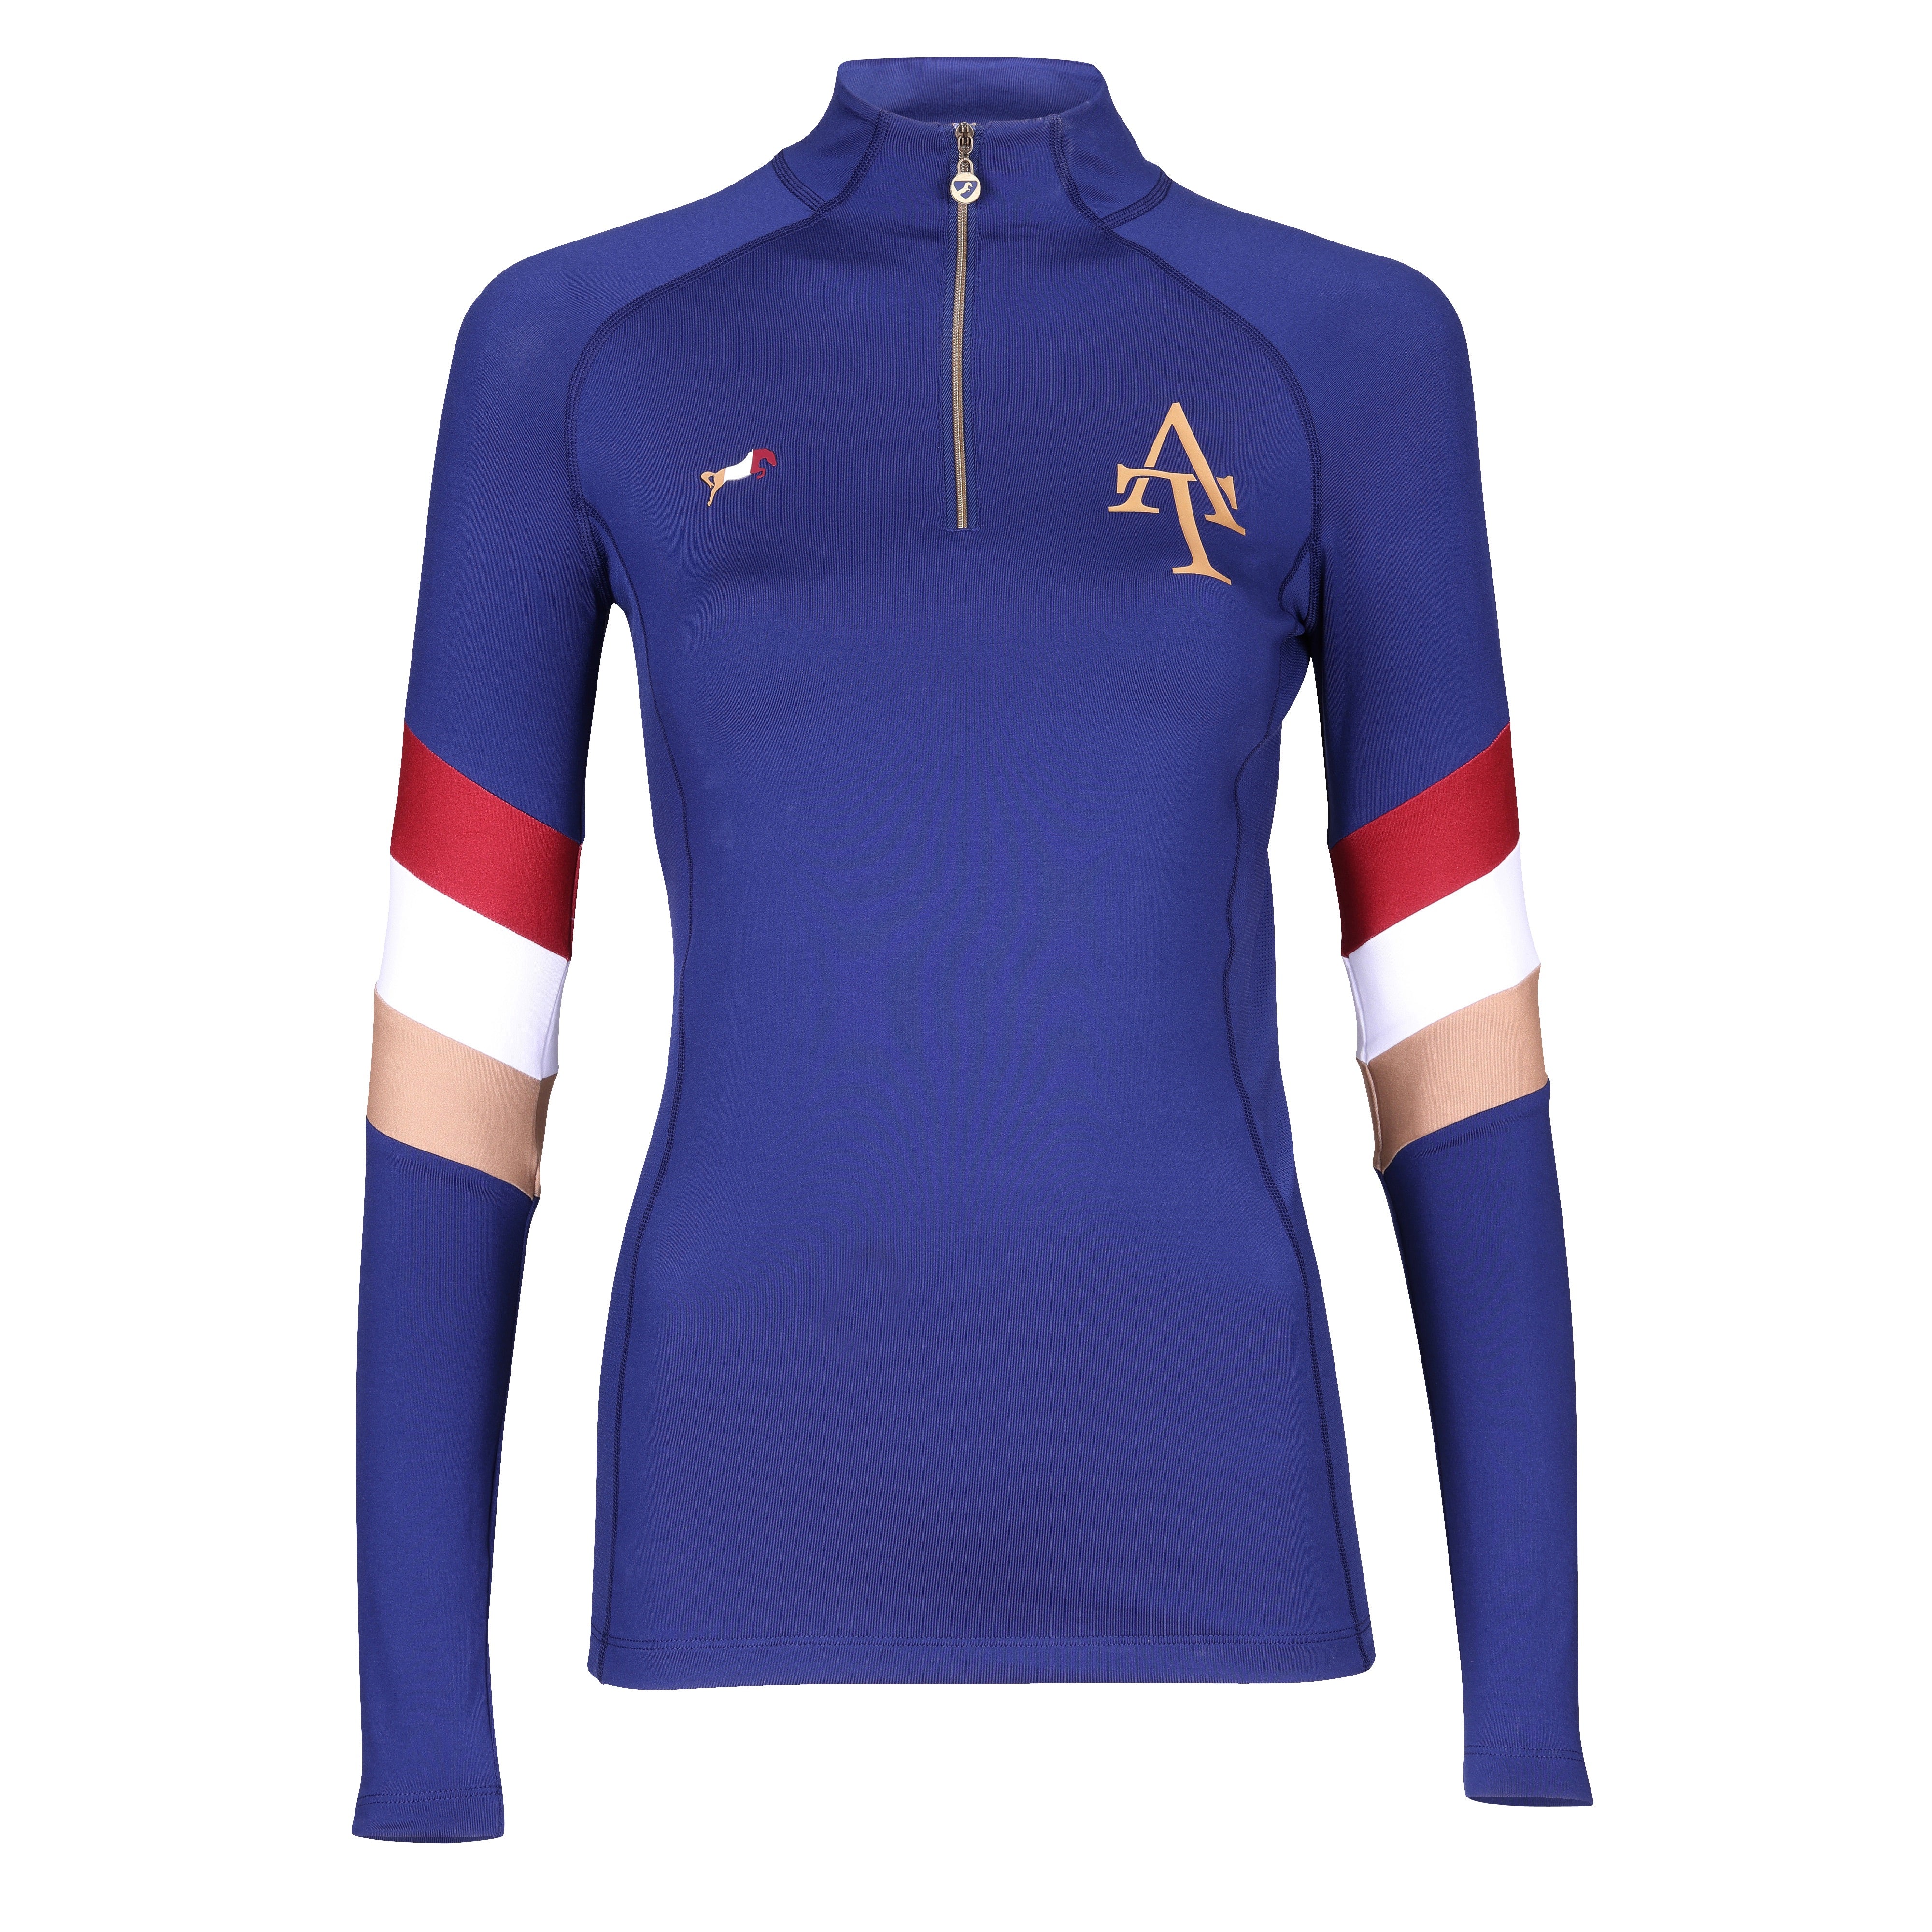 Shires Ladies Aubrion Team Long Sleeve Base Layer